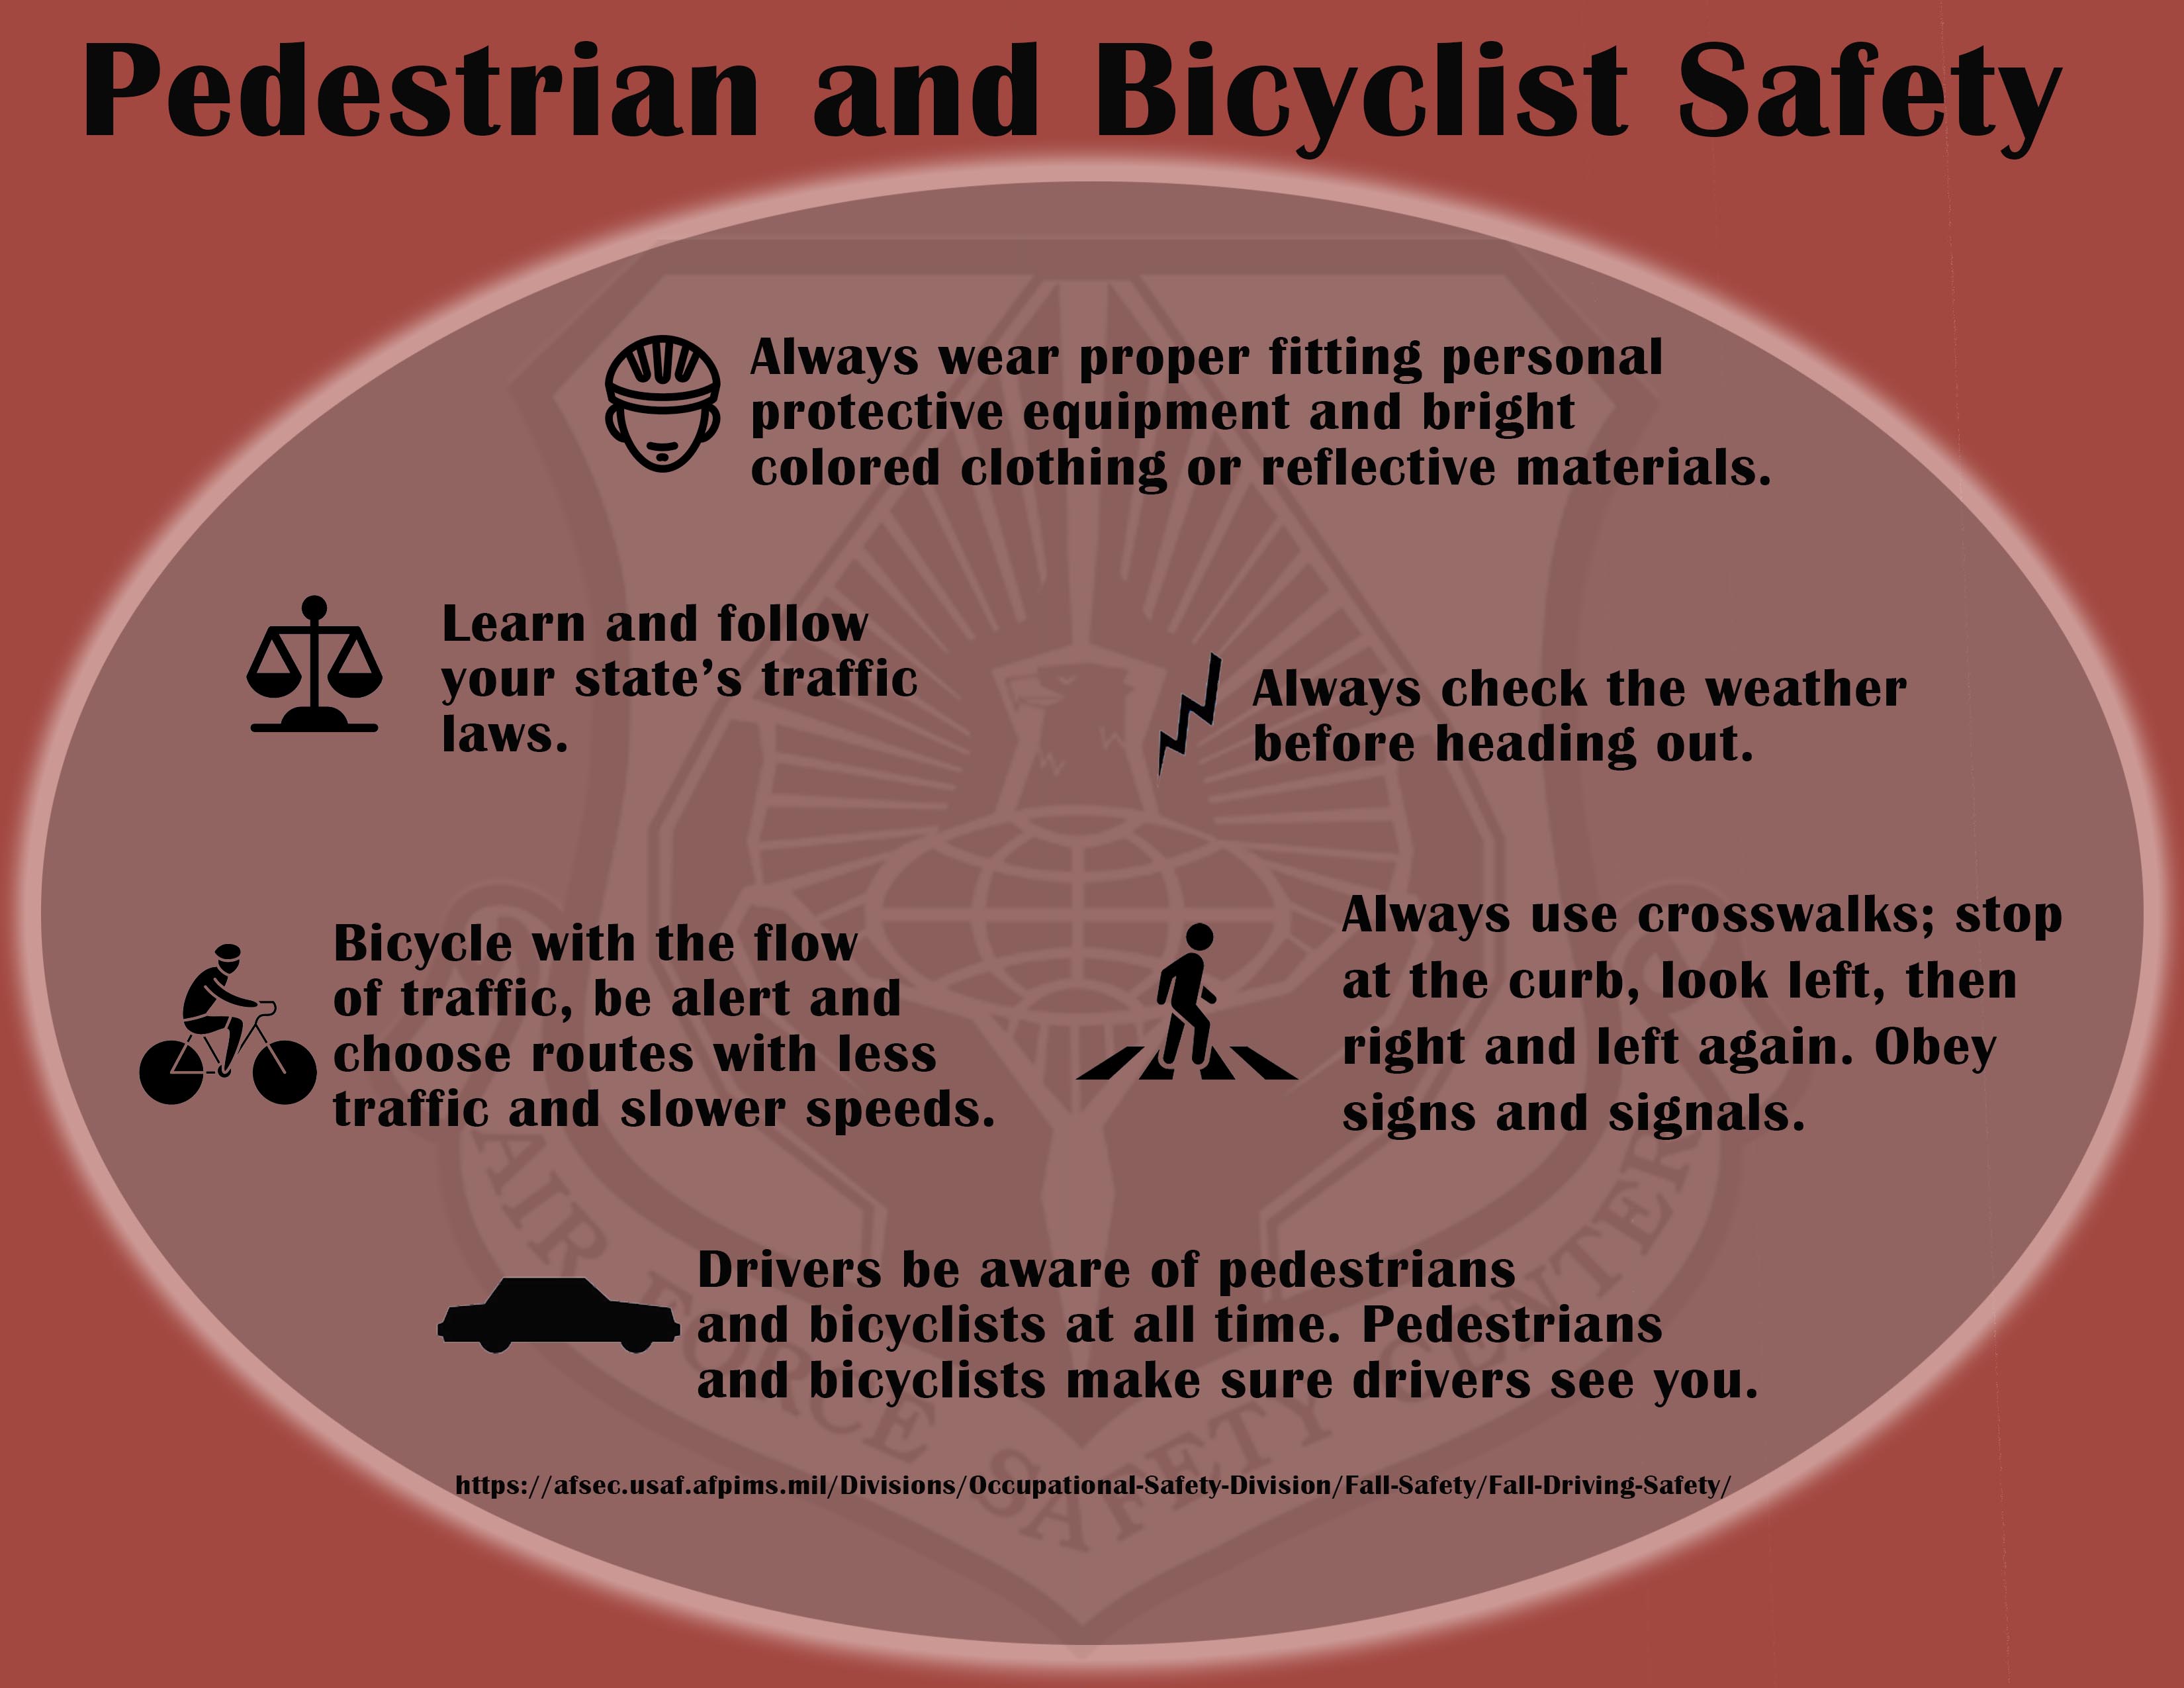 Pedestrian and Bicyclist Safety Poster